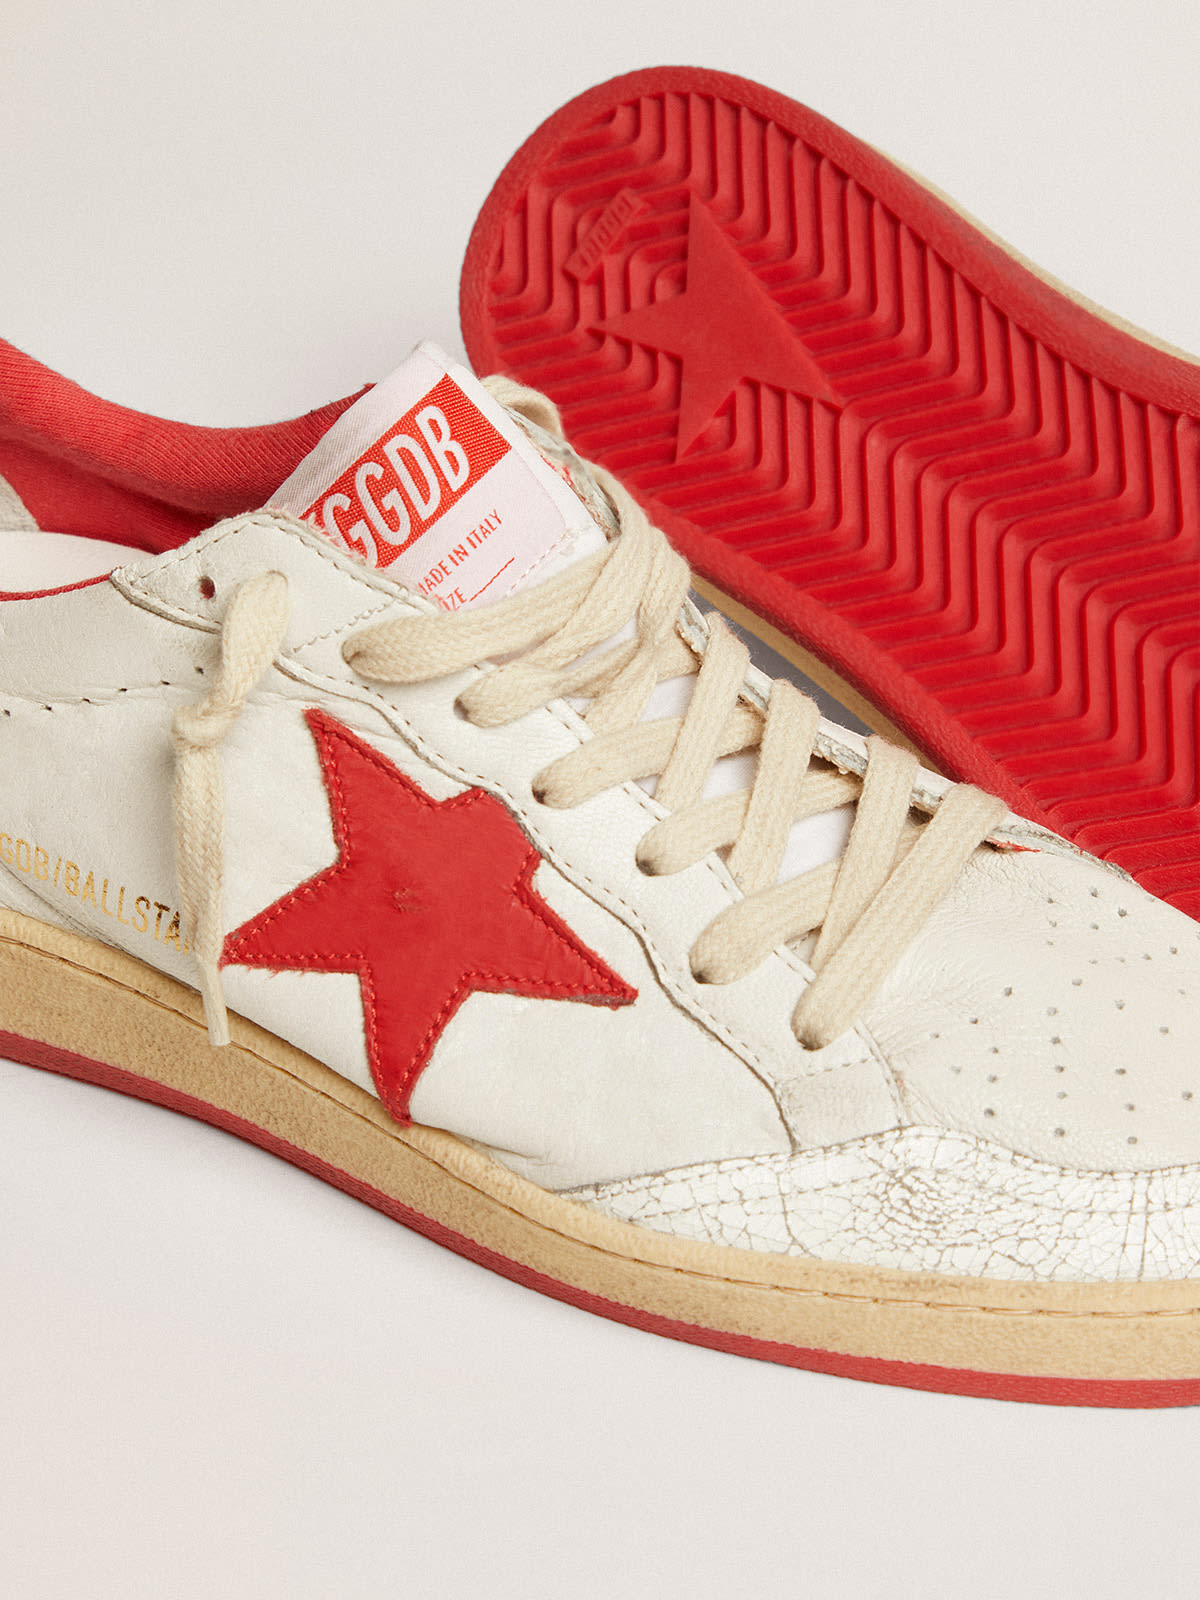 Golden Goose - Women's Ball Star in white leather with red star and heel tab in 